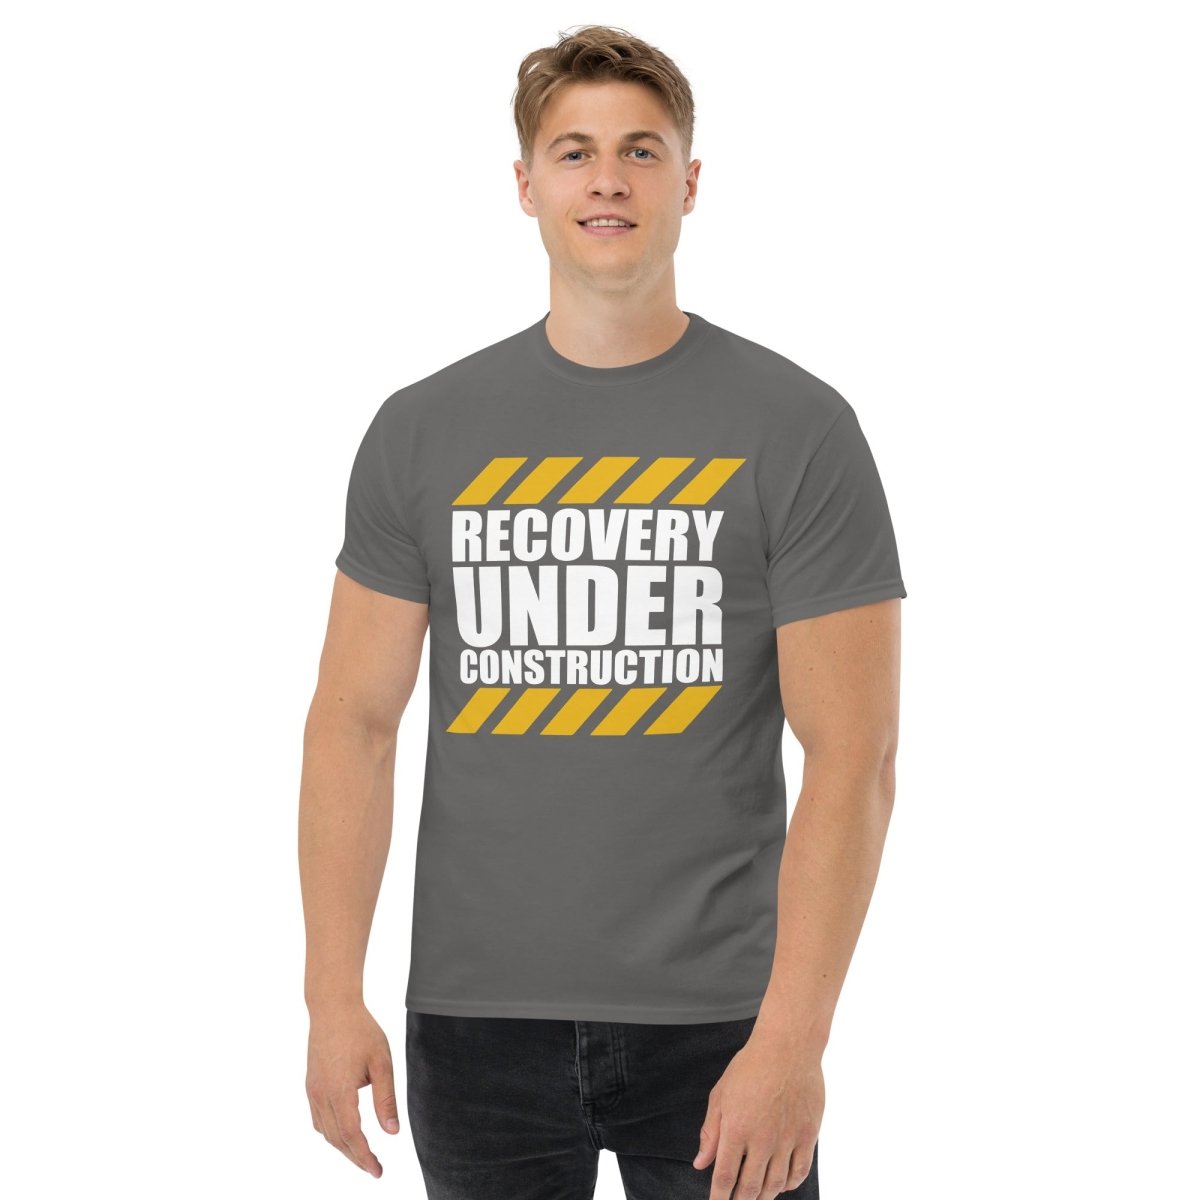 Recovery Under Construction - Men's Classic Tee for Healing Progress - Clean & Sober